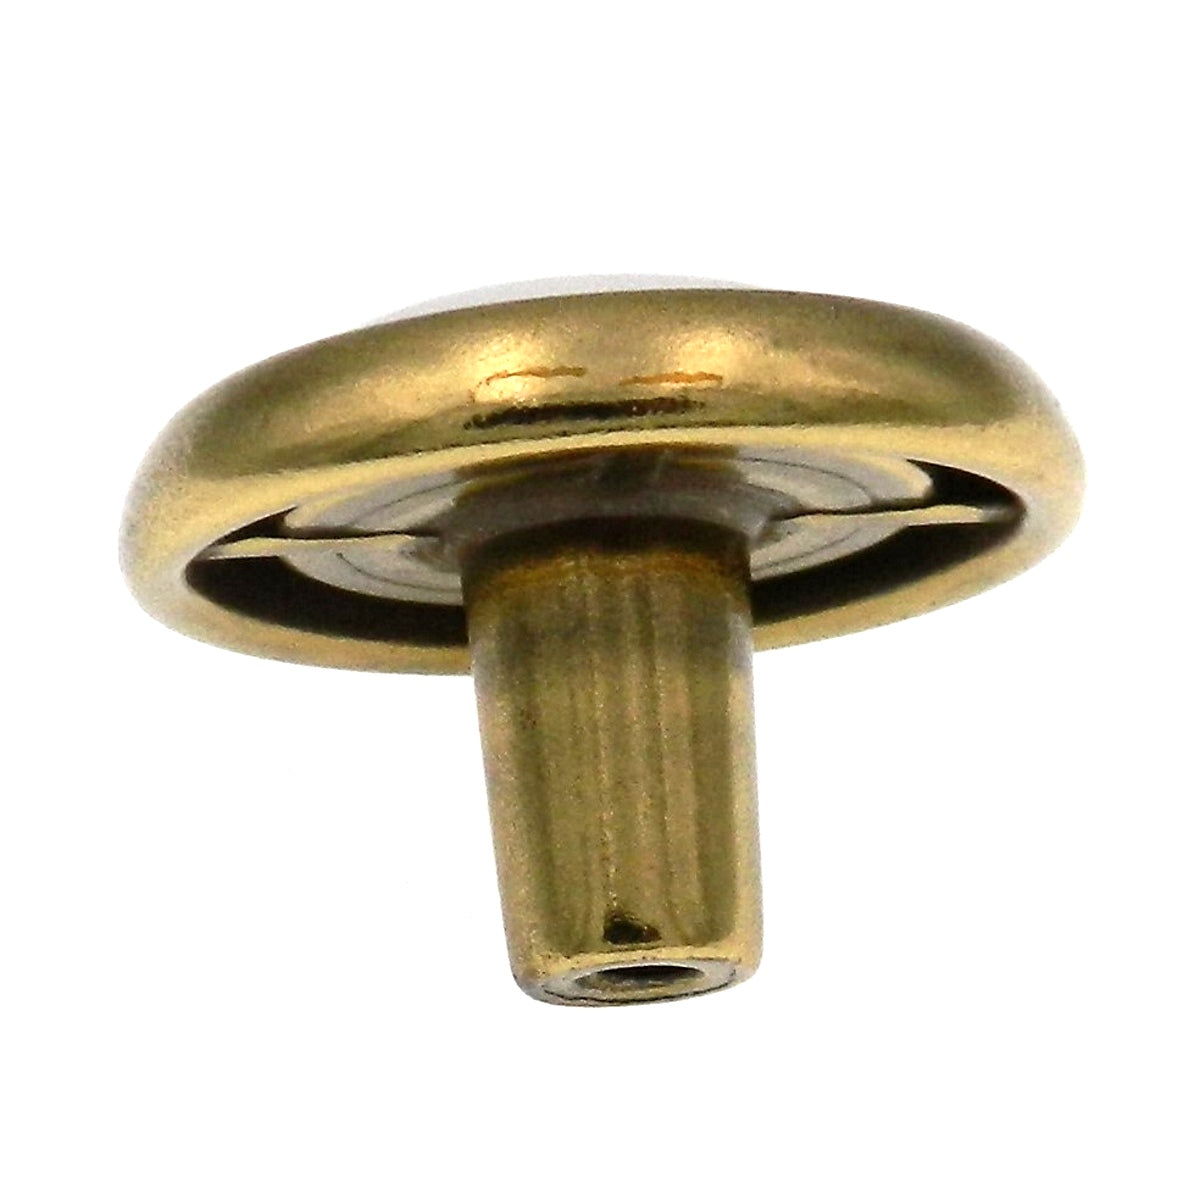 10 Pack Hickory P709-W Lancaster Brass 1 3/16" Cabinet Knobs with White Center